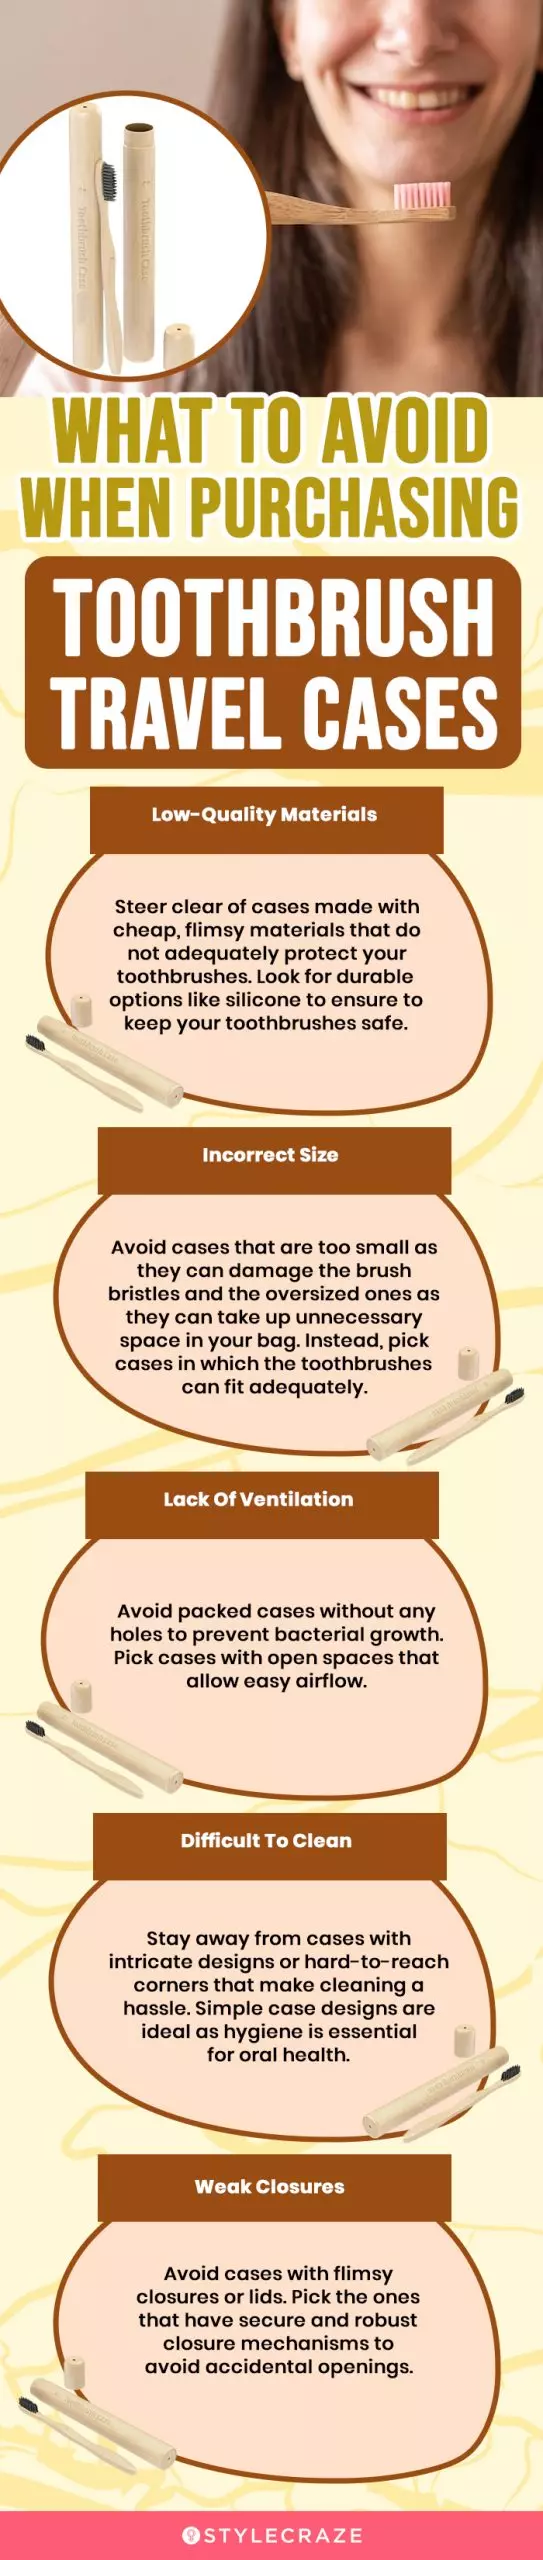 What To Avoid When Purchasing Toothbrush Travel Cases (infographic)